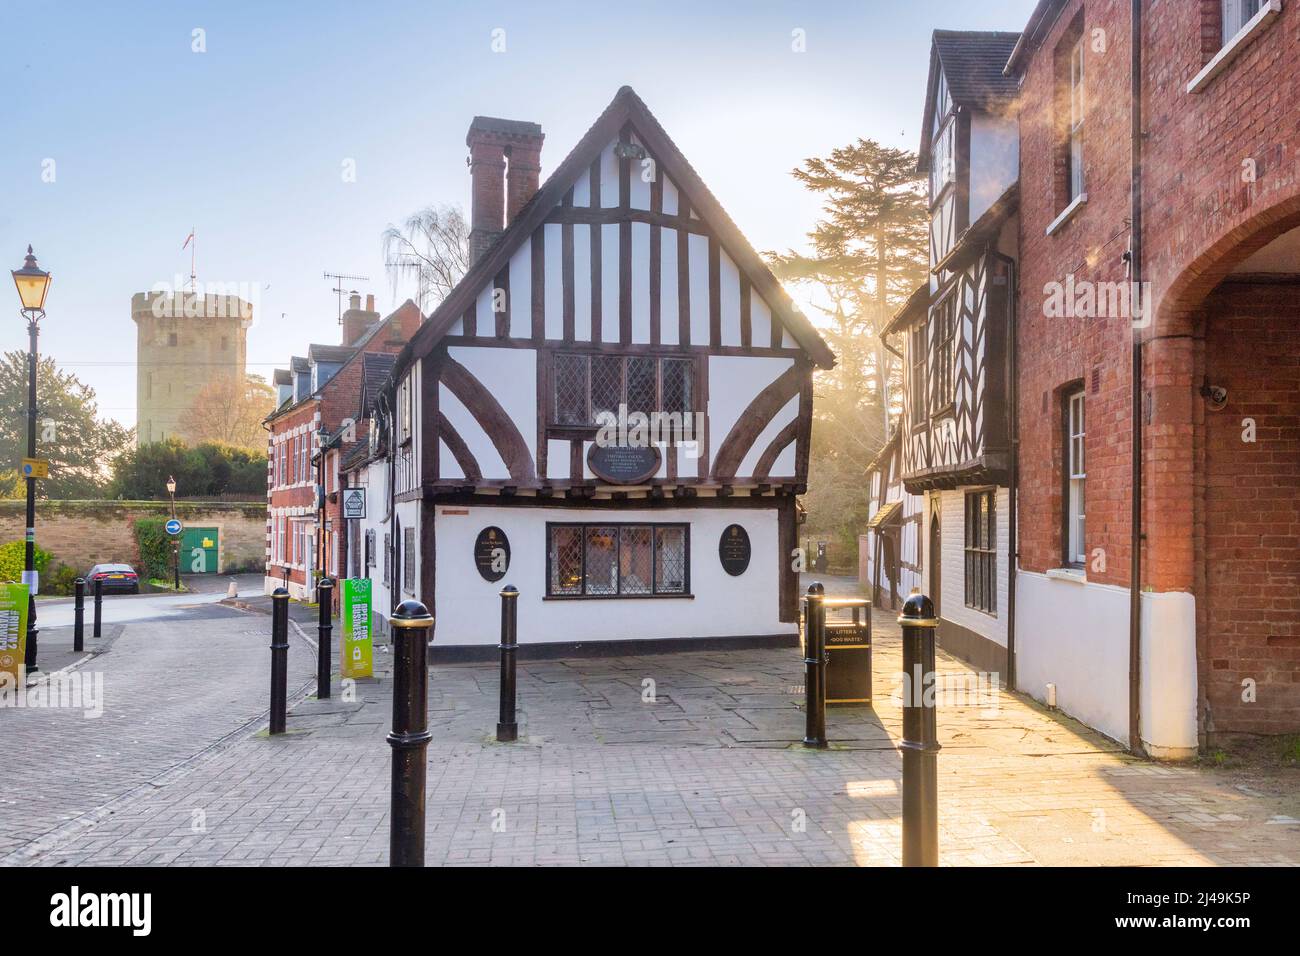 17 January 2022: Warwick, UK - Oken's House, Warwick, UK - Beautiful Tudor building in the town of Warwick, England. The castle can be seen in the bac Stock Photo